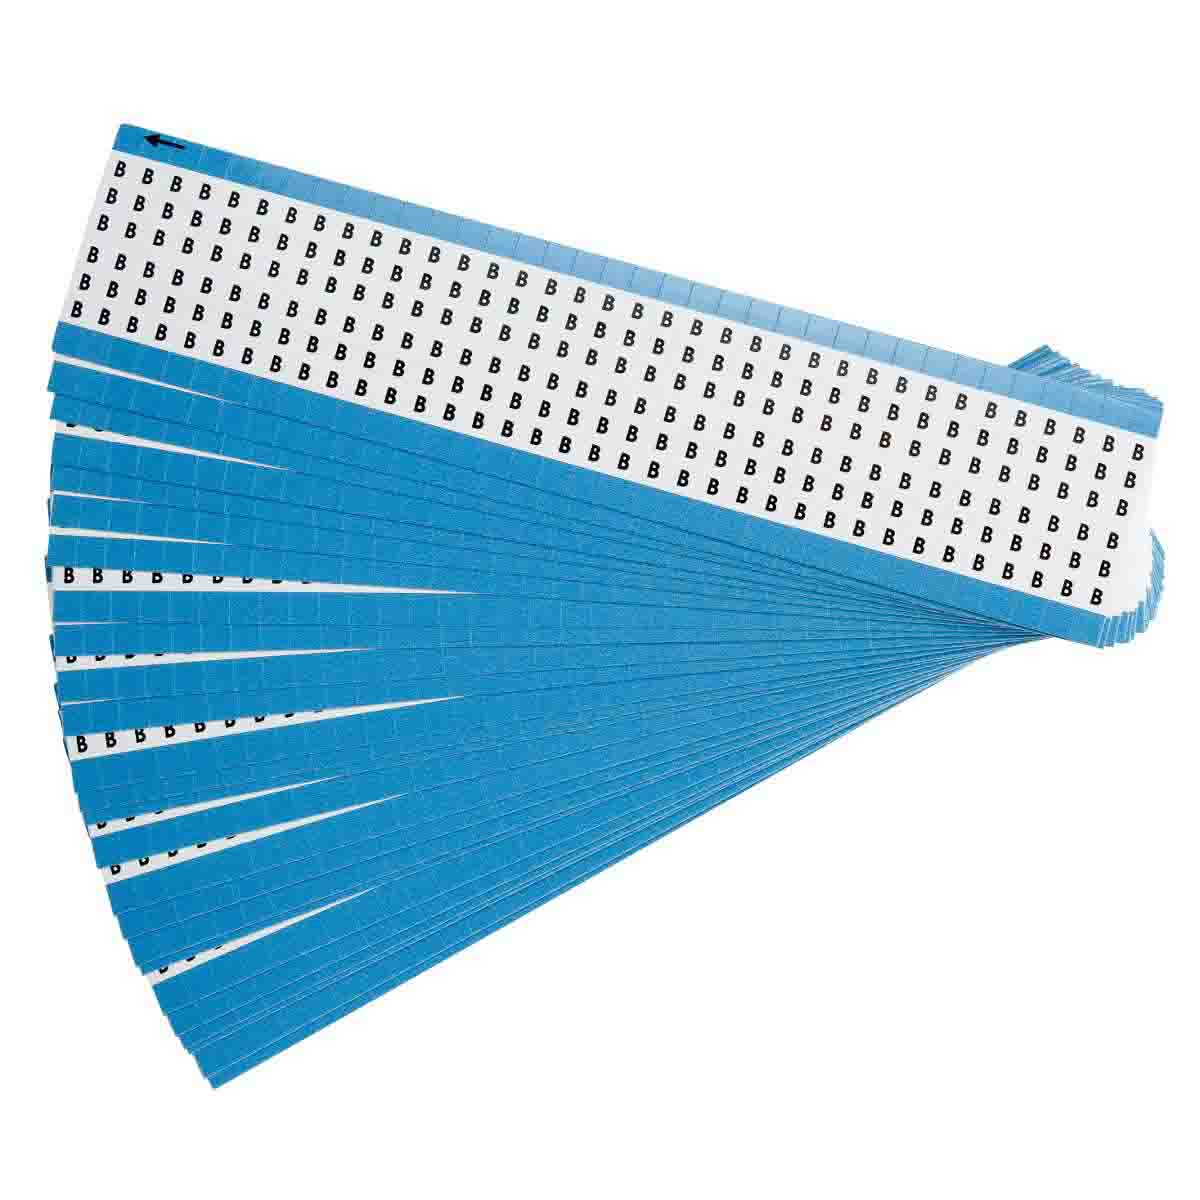 25 Cards B-500 Solid Numbers Wire Marker Card Brady WM-221-PK Repositionable Vinyl Cloth Black on White 